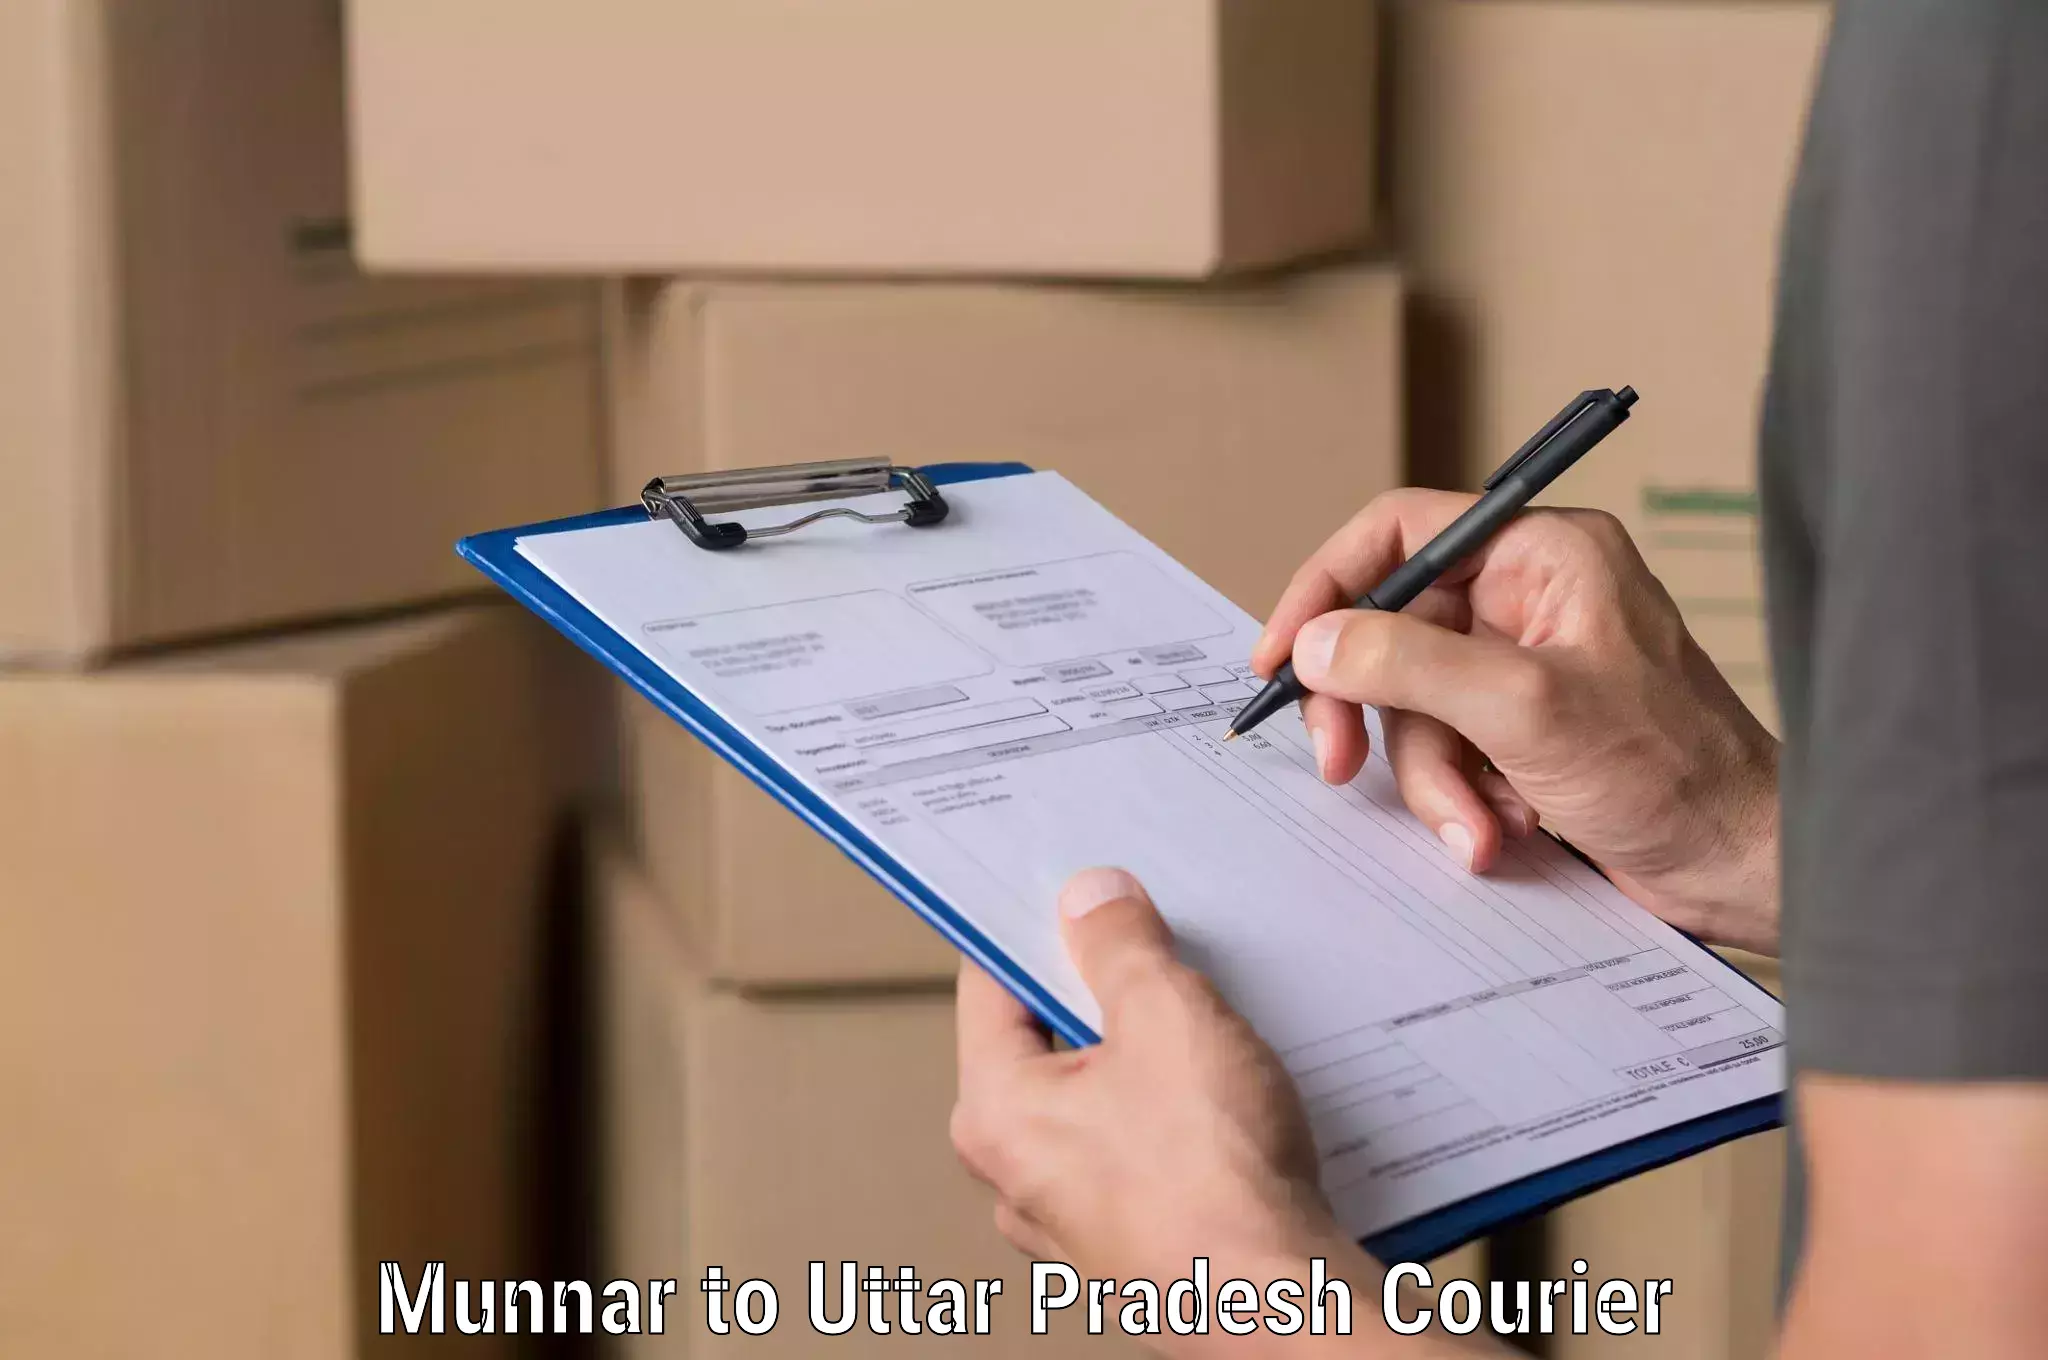 Subscription-based courier Munnar to Vrindavan